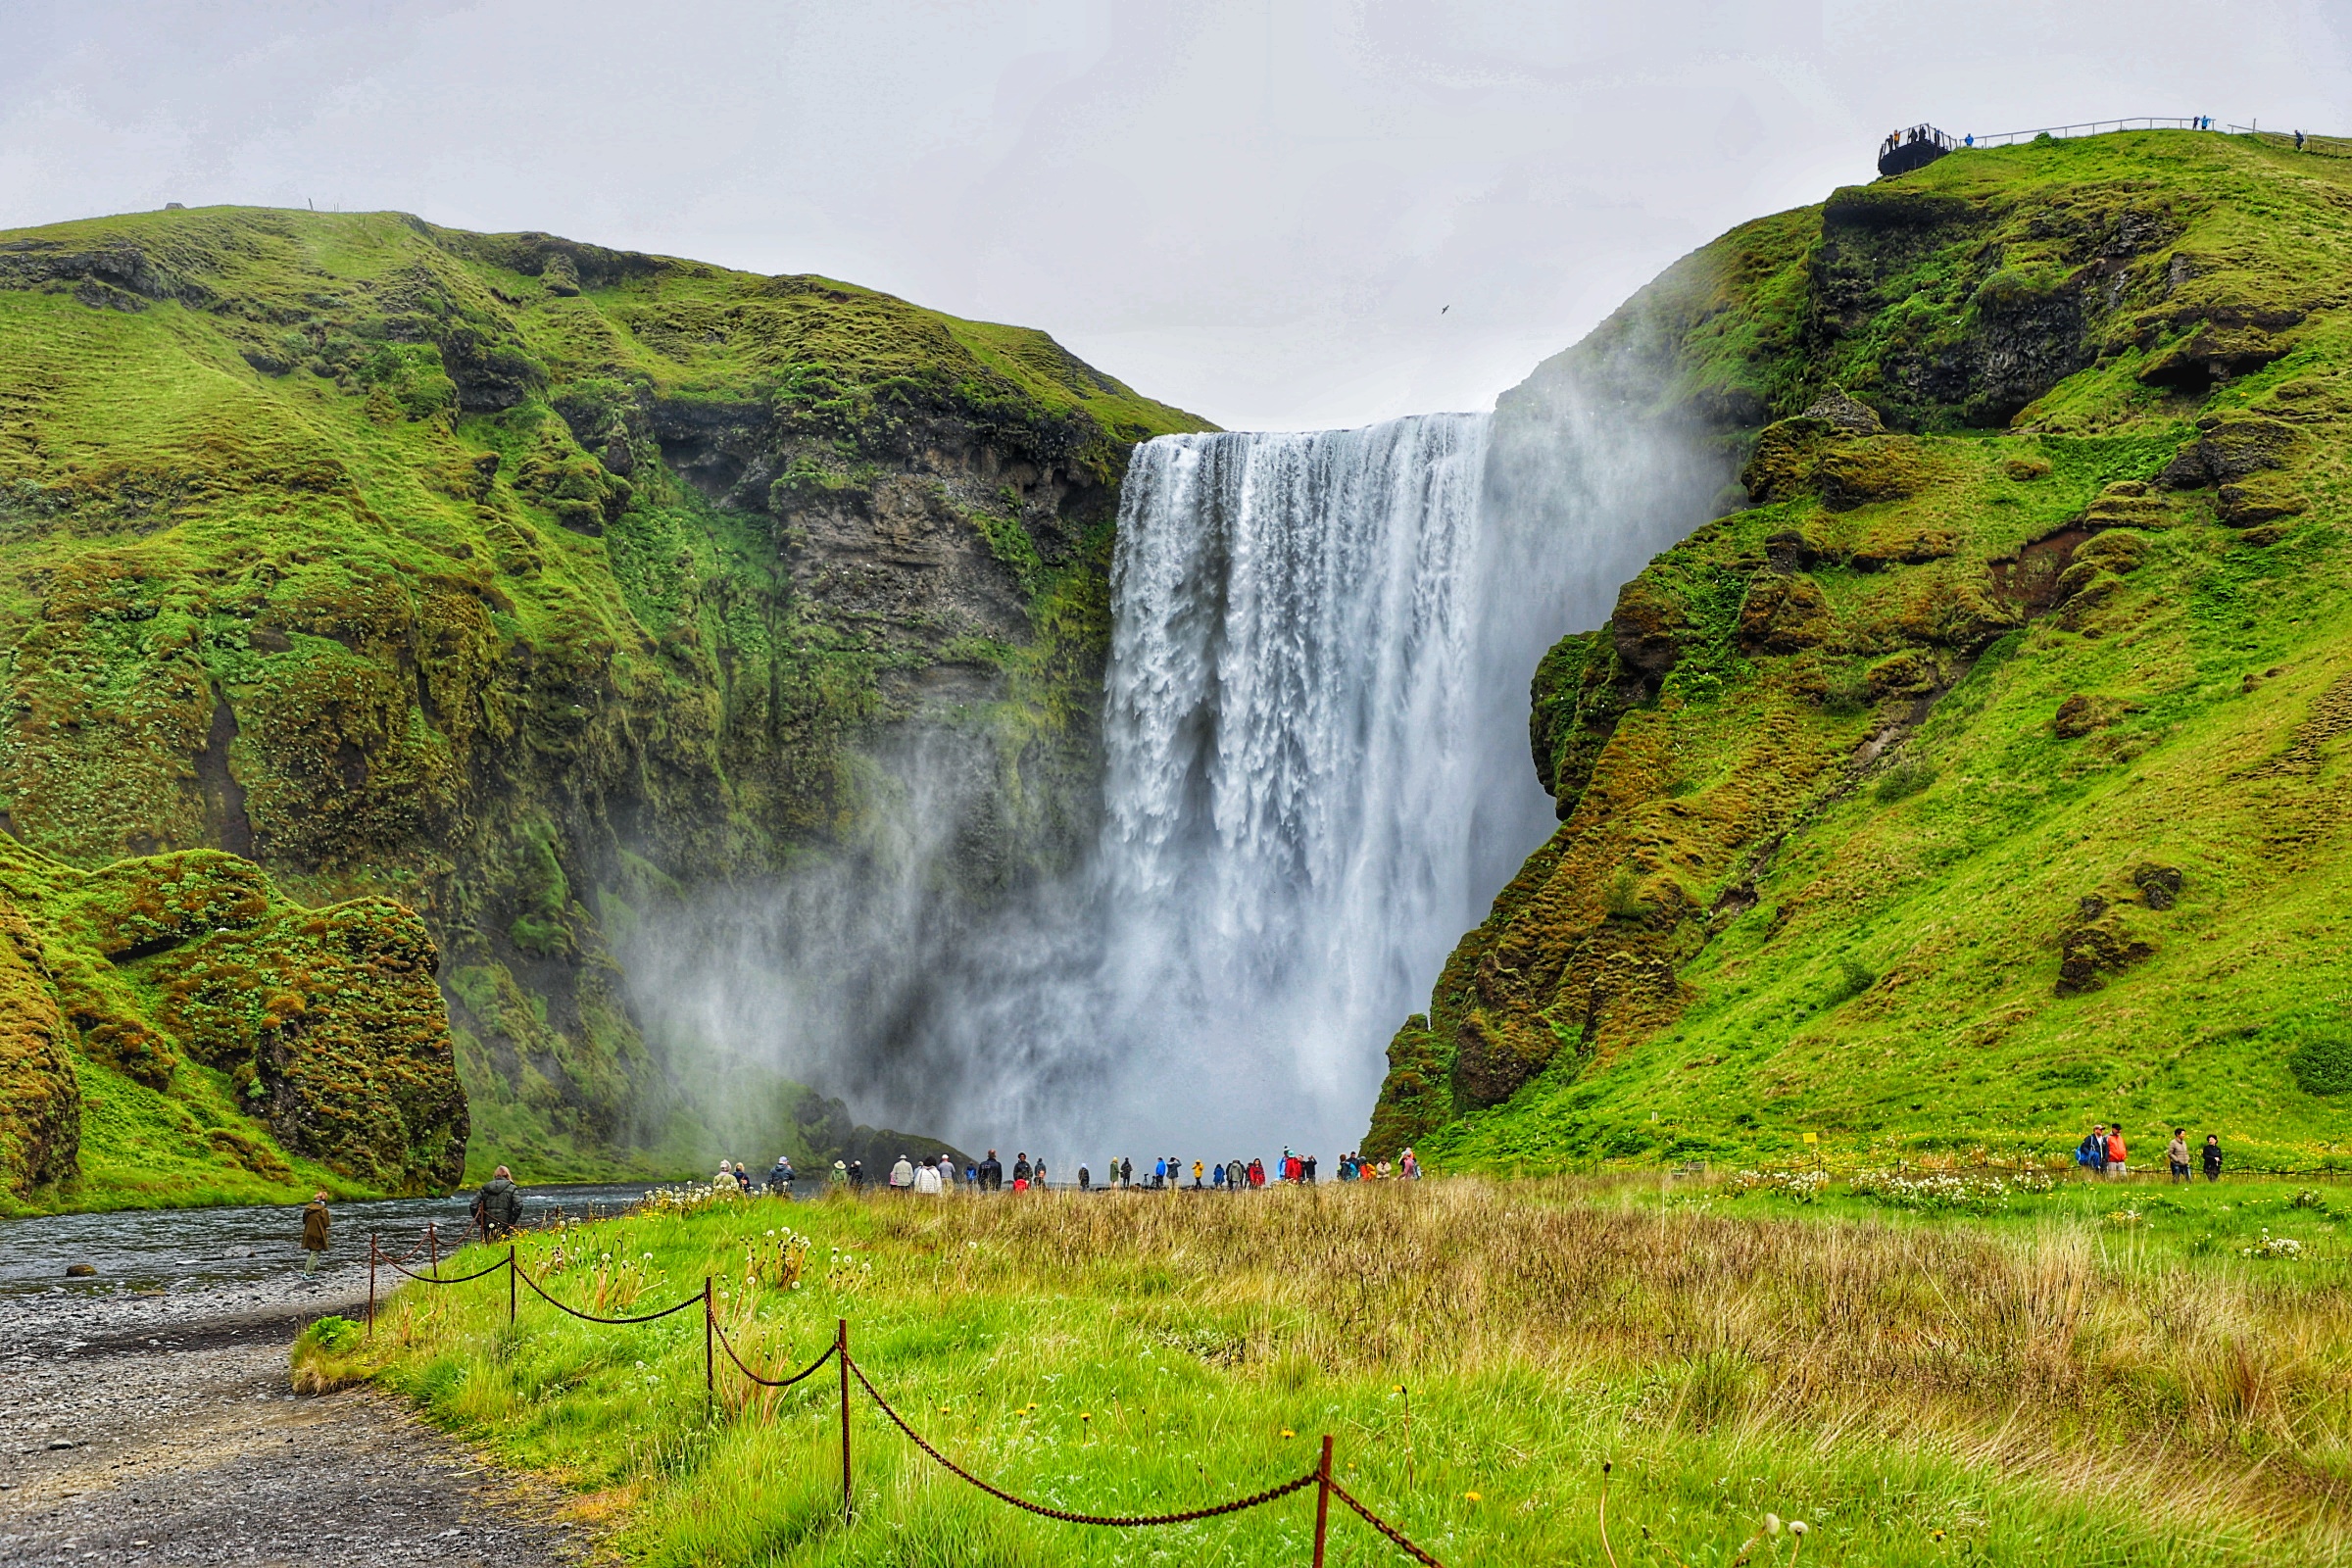 The Skógafoss waterfall in iceland in summer